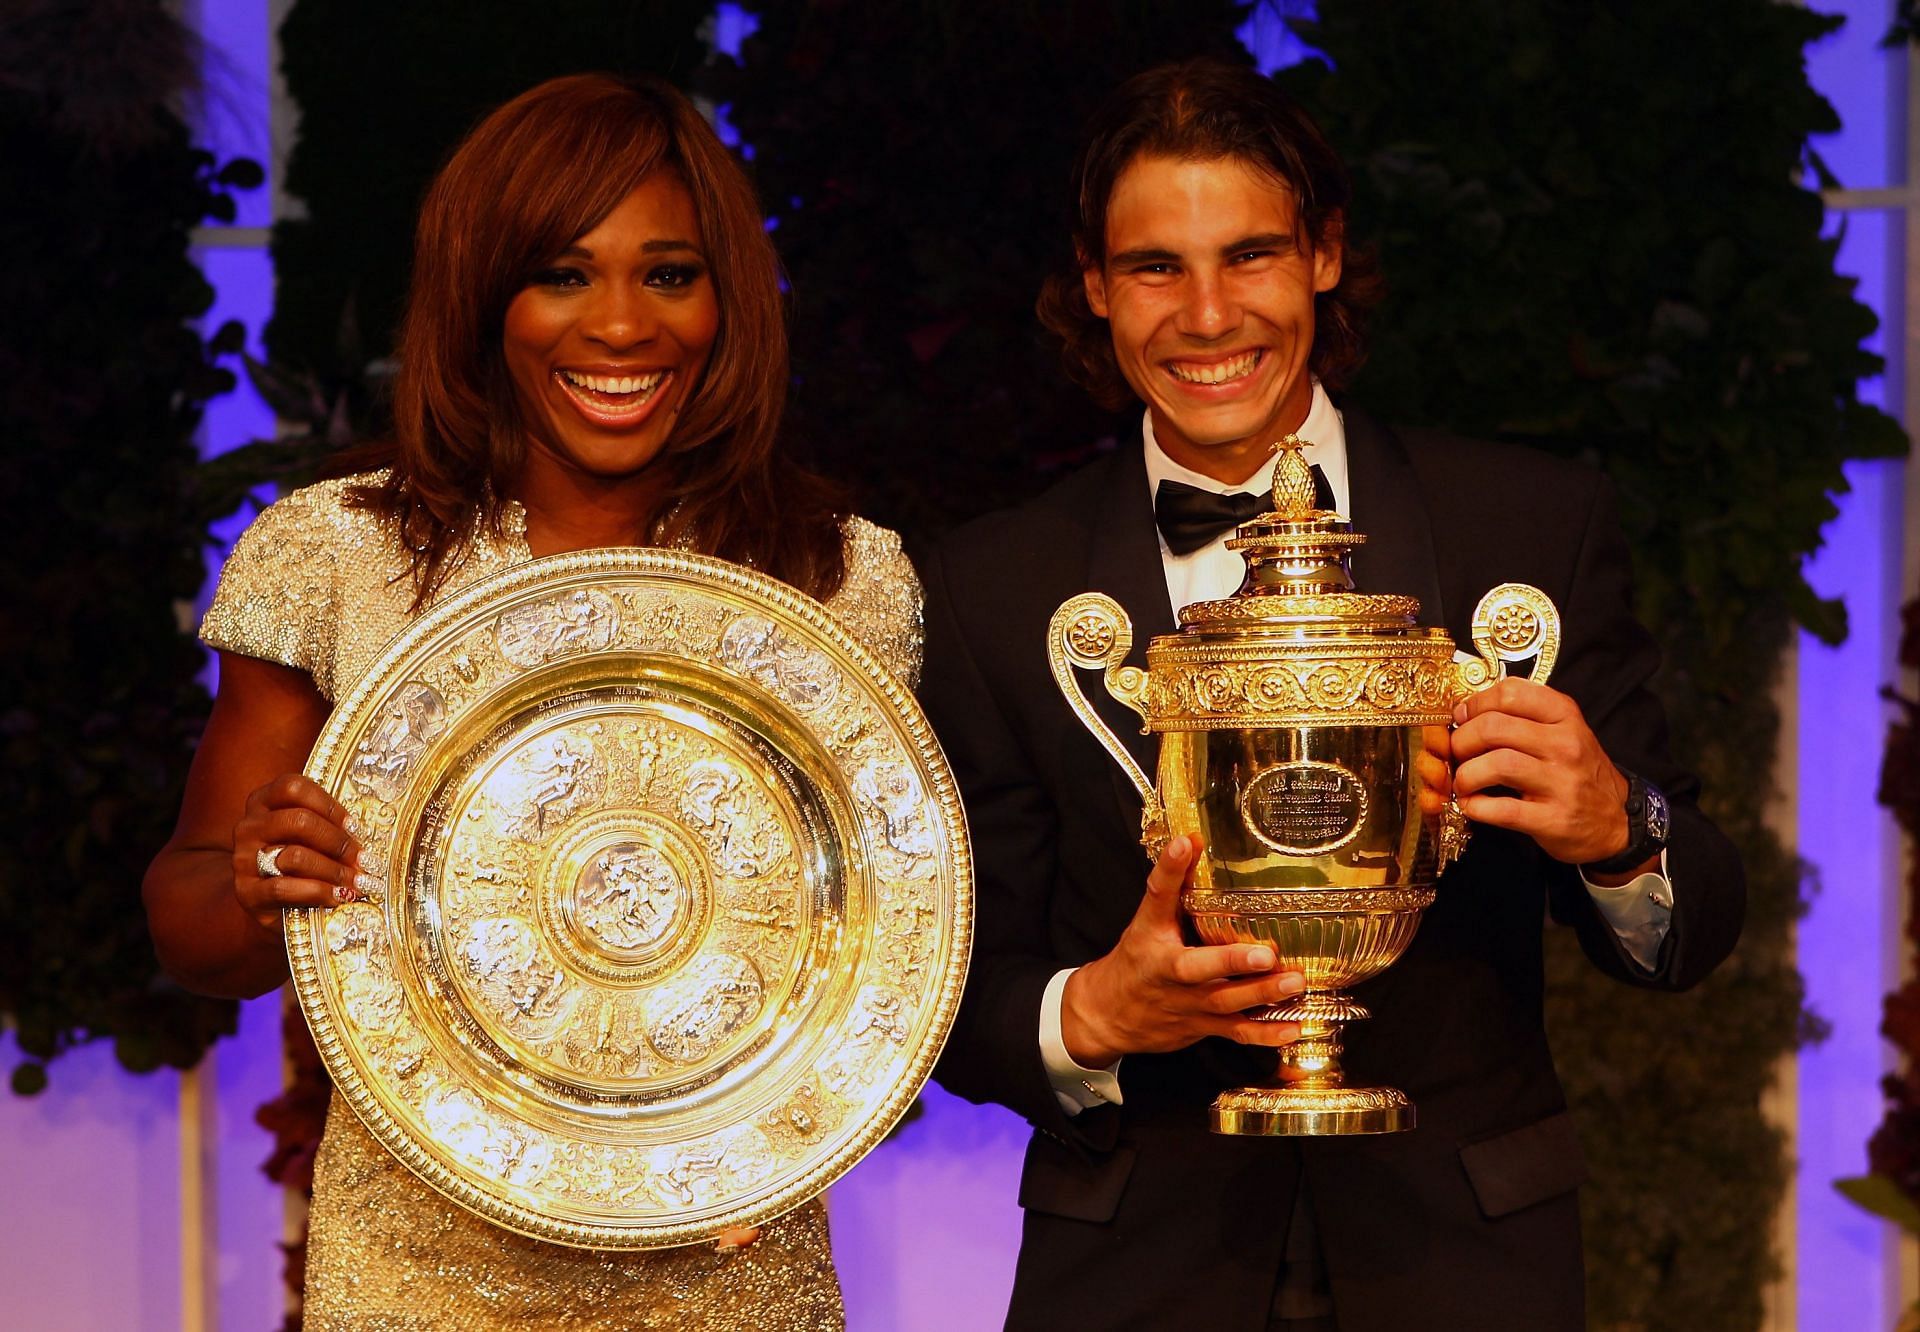 Serena Williams has taken a lot of inspiration from Rafael Nadal&#039;s exploits this year